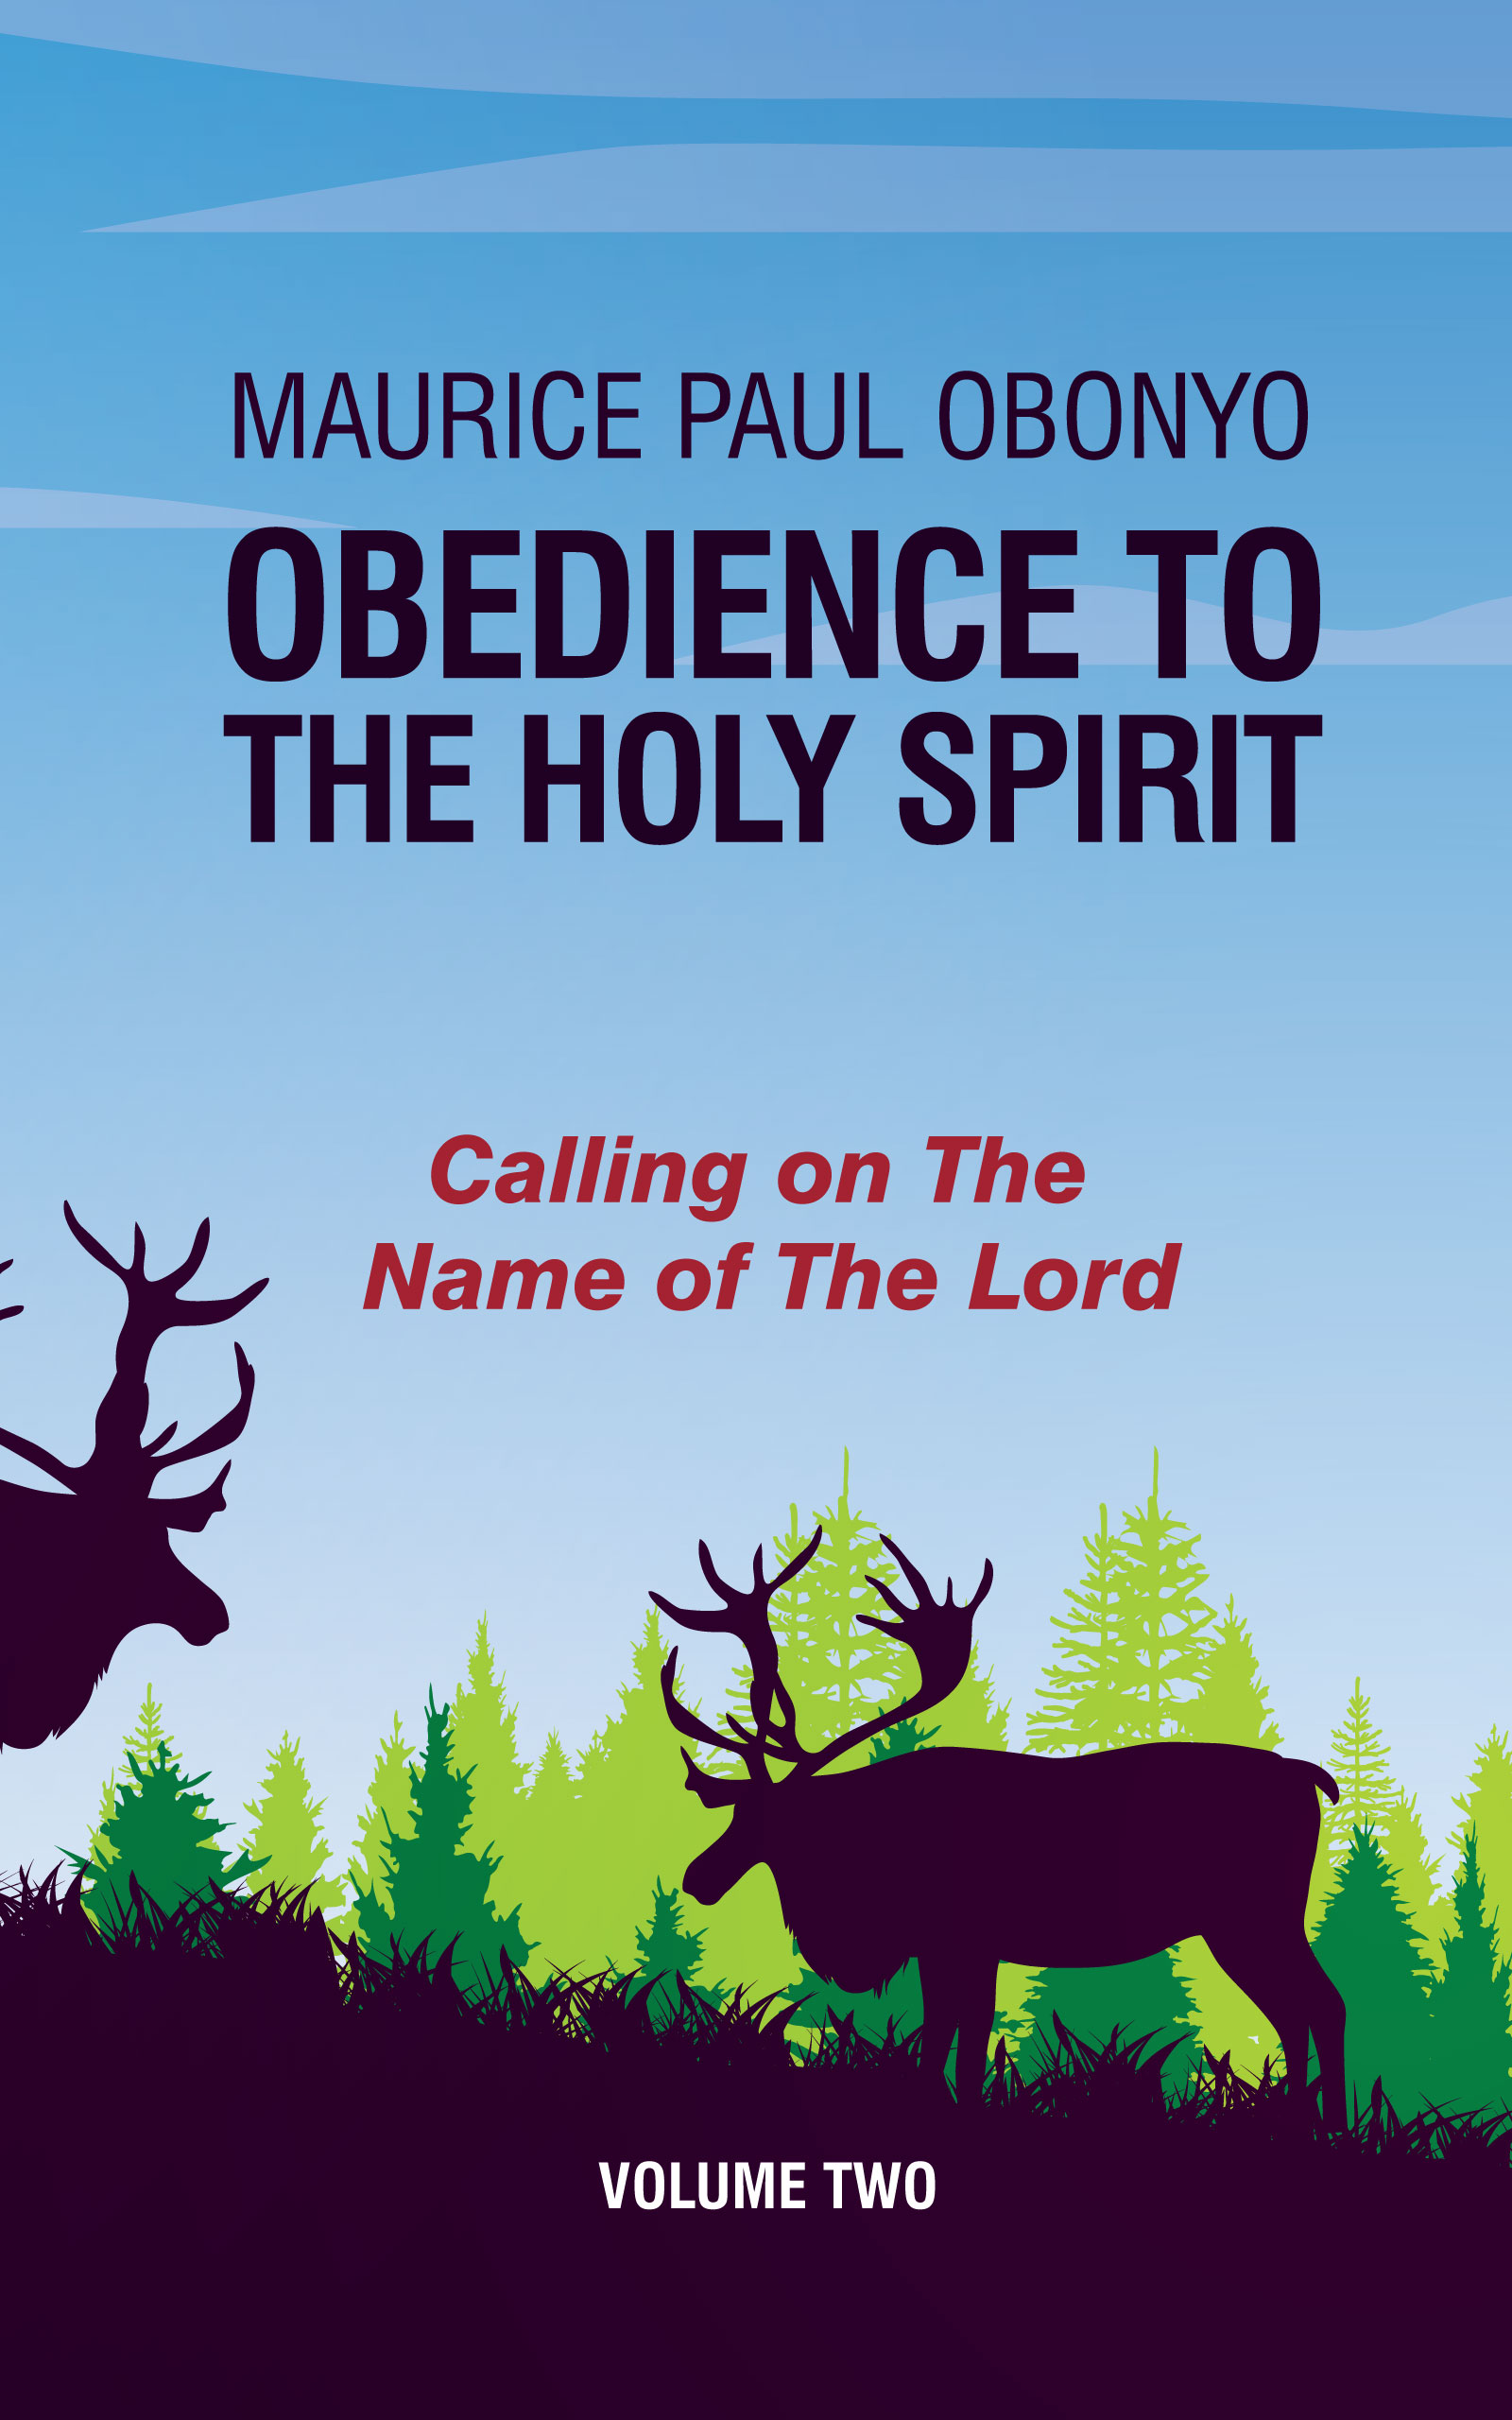 FREE: OBEDIENCE TO THE HOLY SPIRIT: Calling on The Name of The Lord by MAURICE PAUL OBONYO